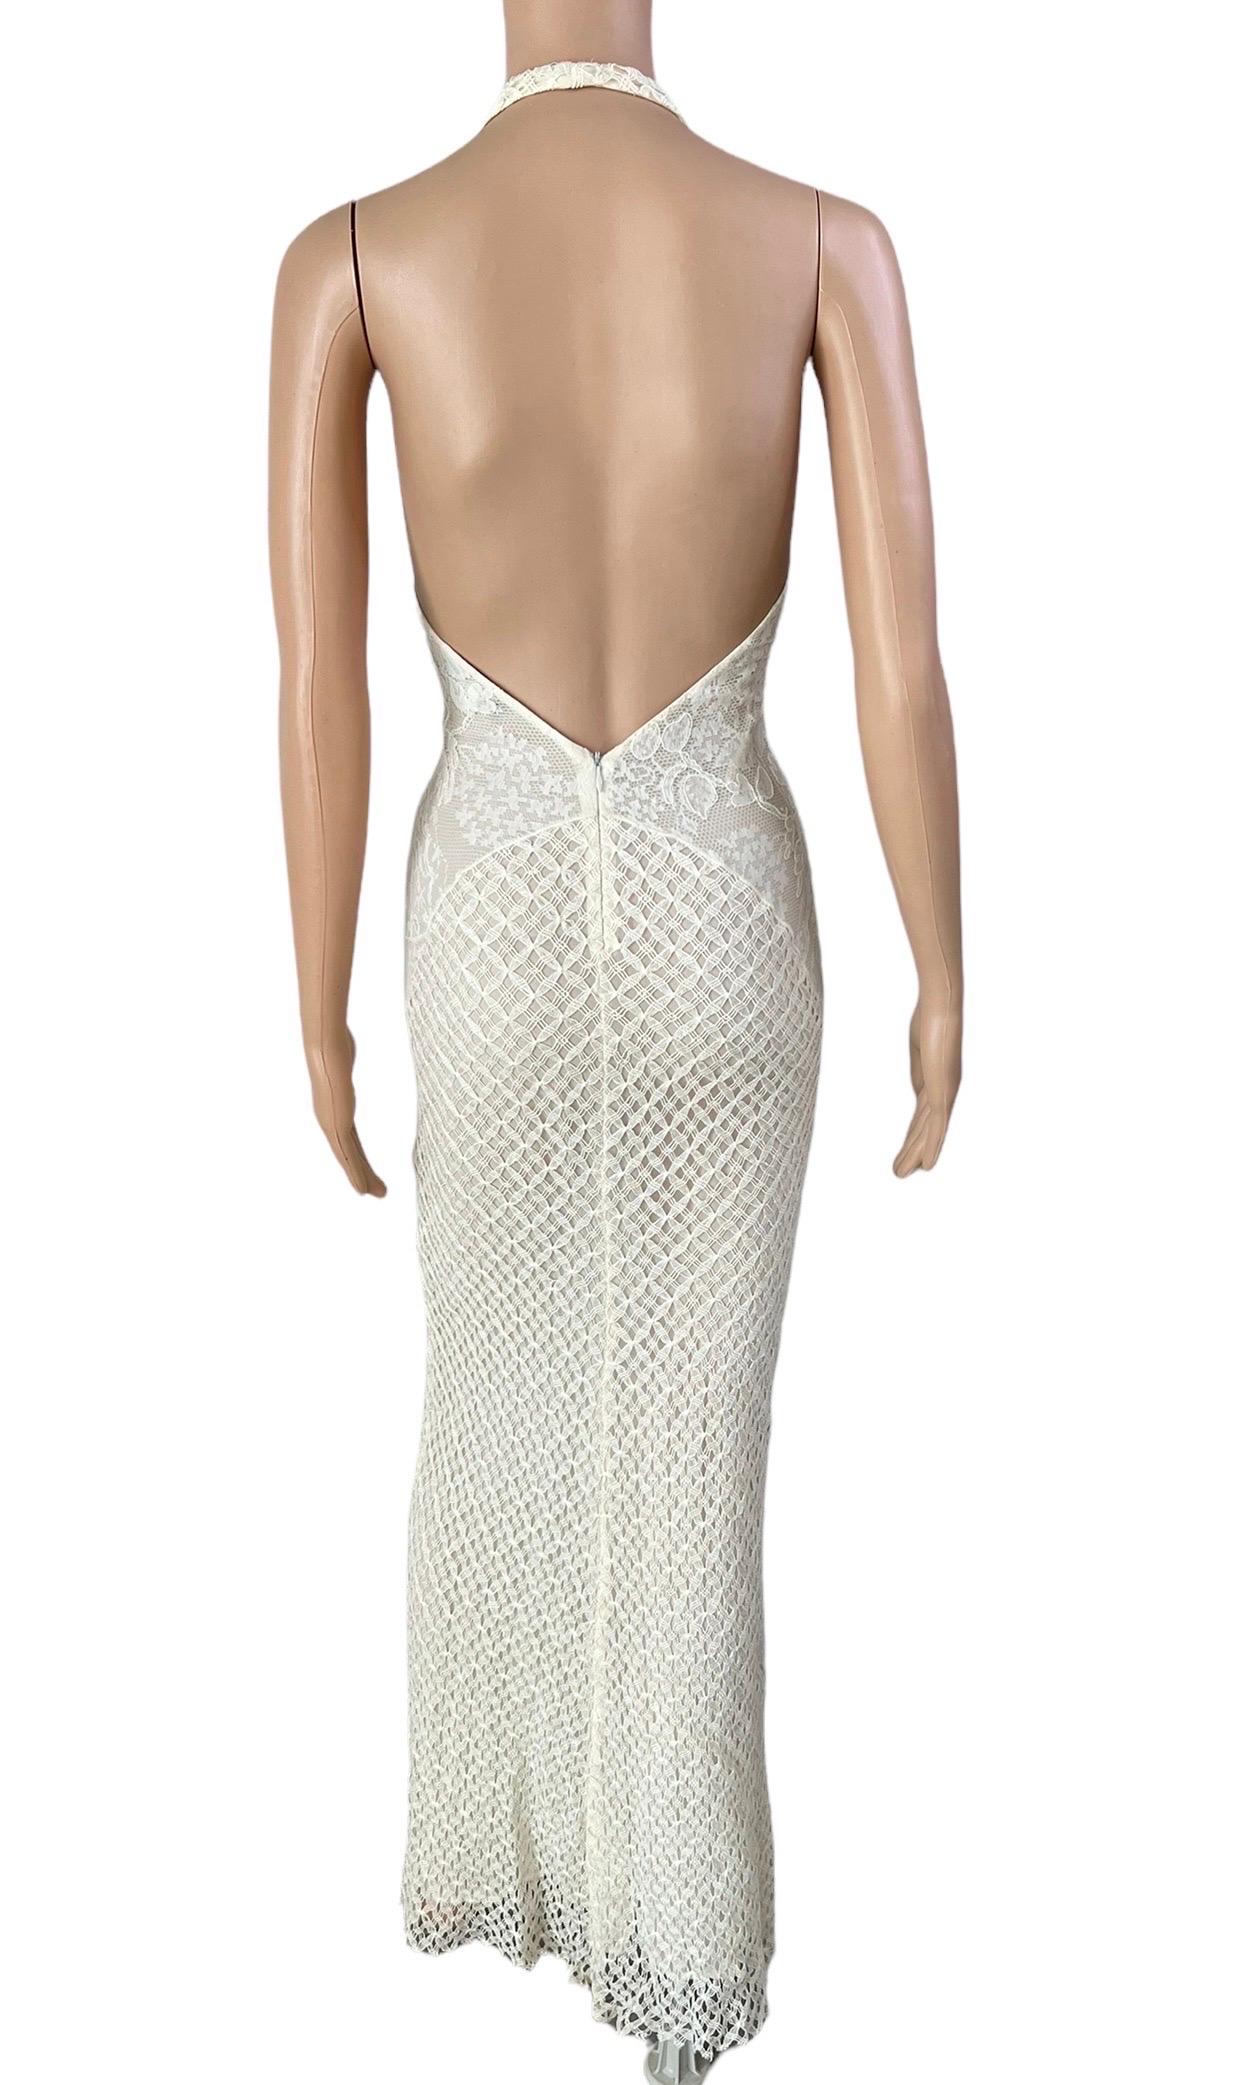 Gianni Versace S/S 2002 Plunging Backless Semi Sheer Lace Knit Ivory Dress Gown 6